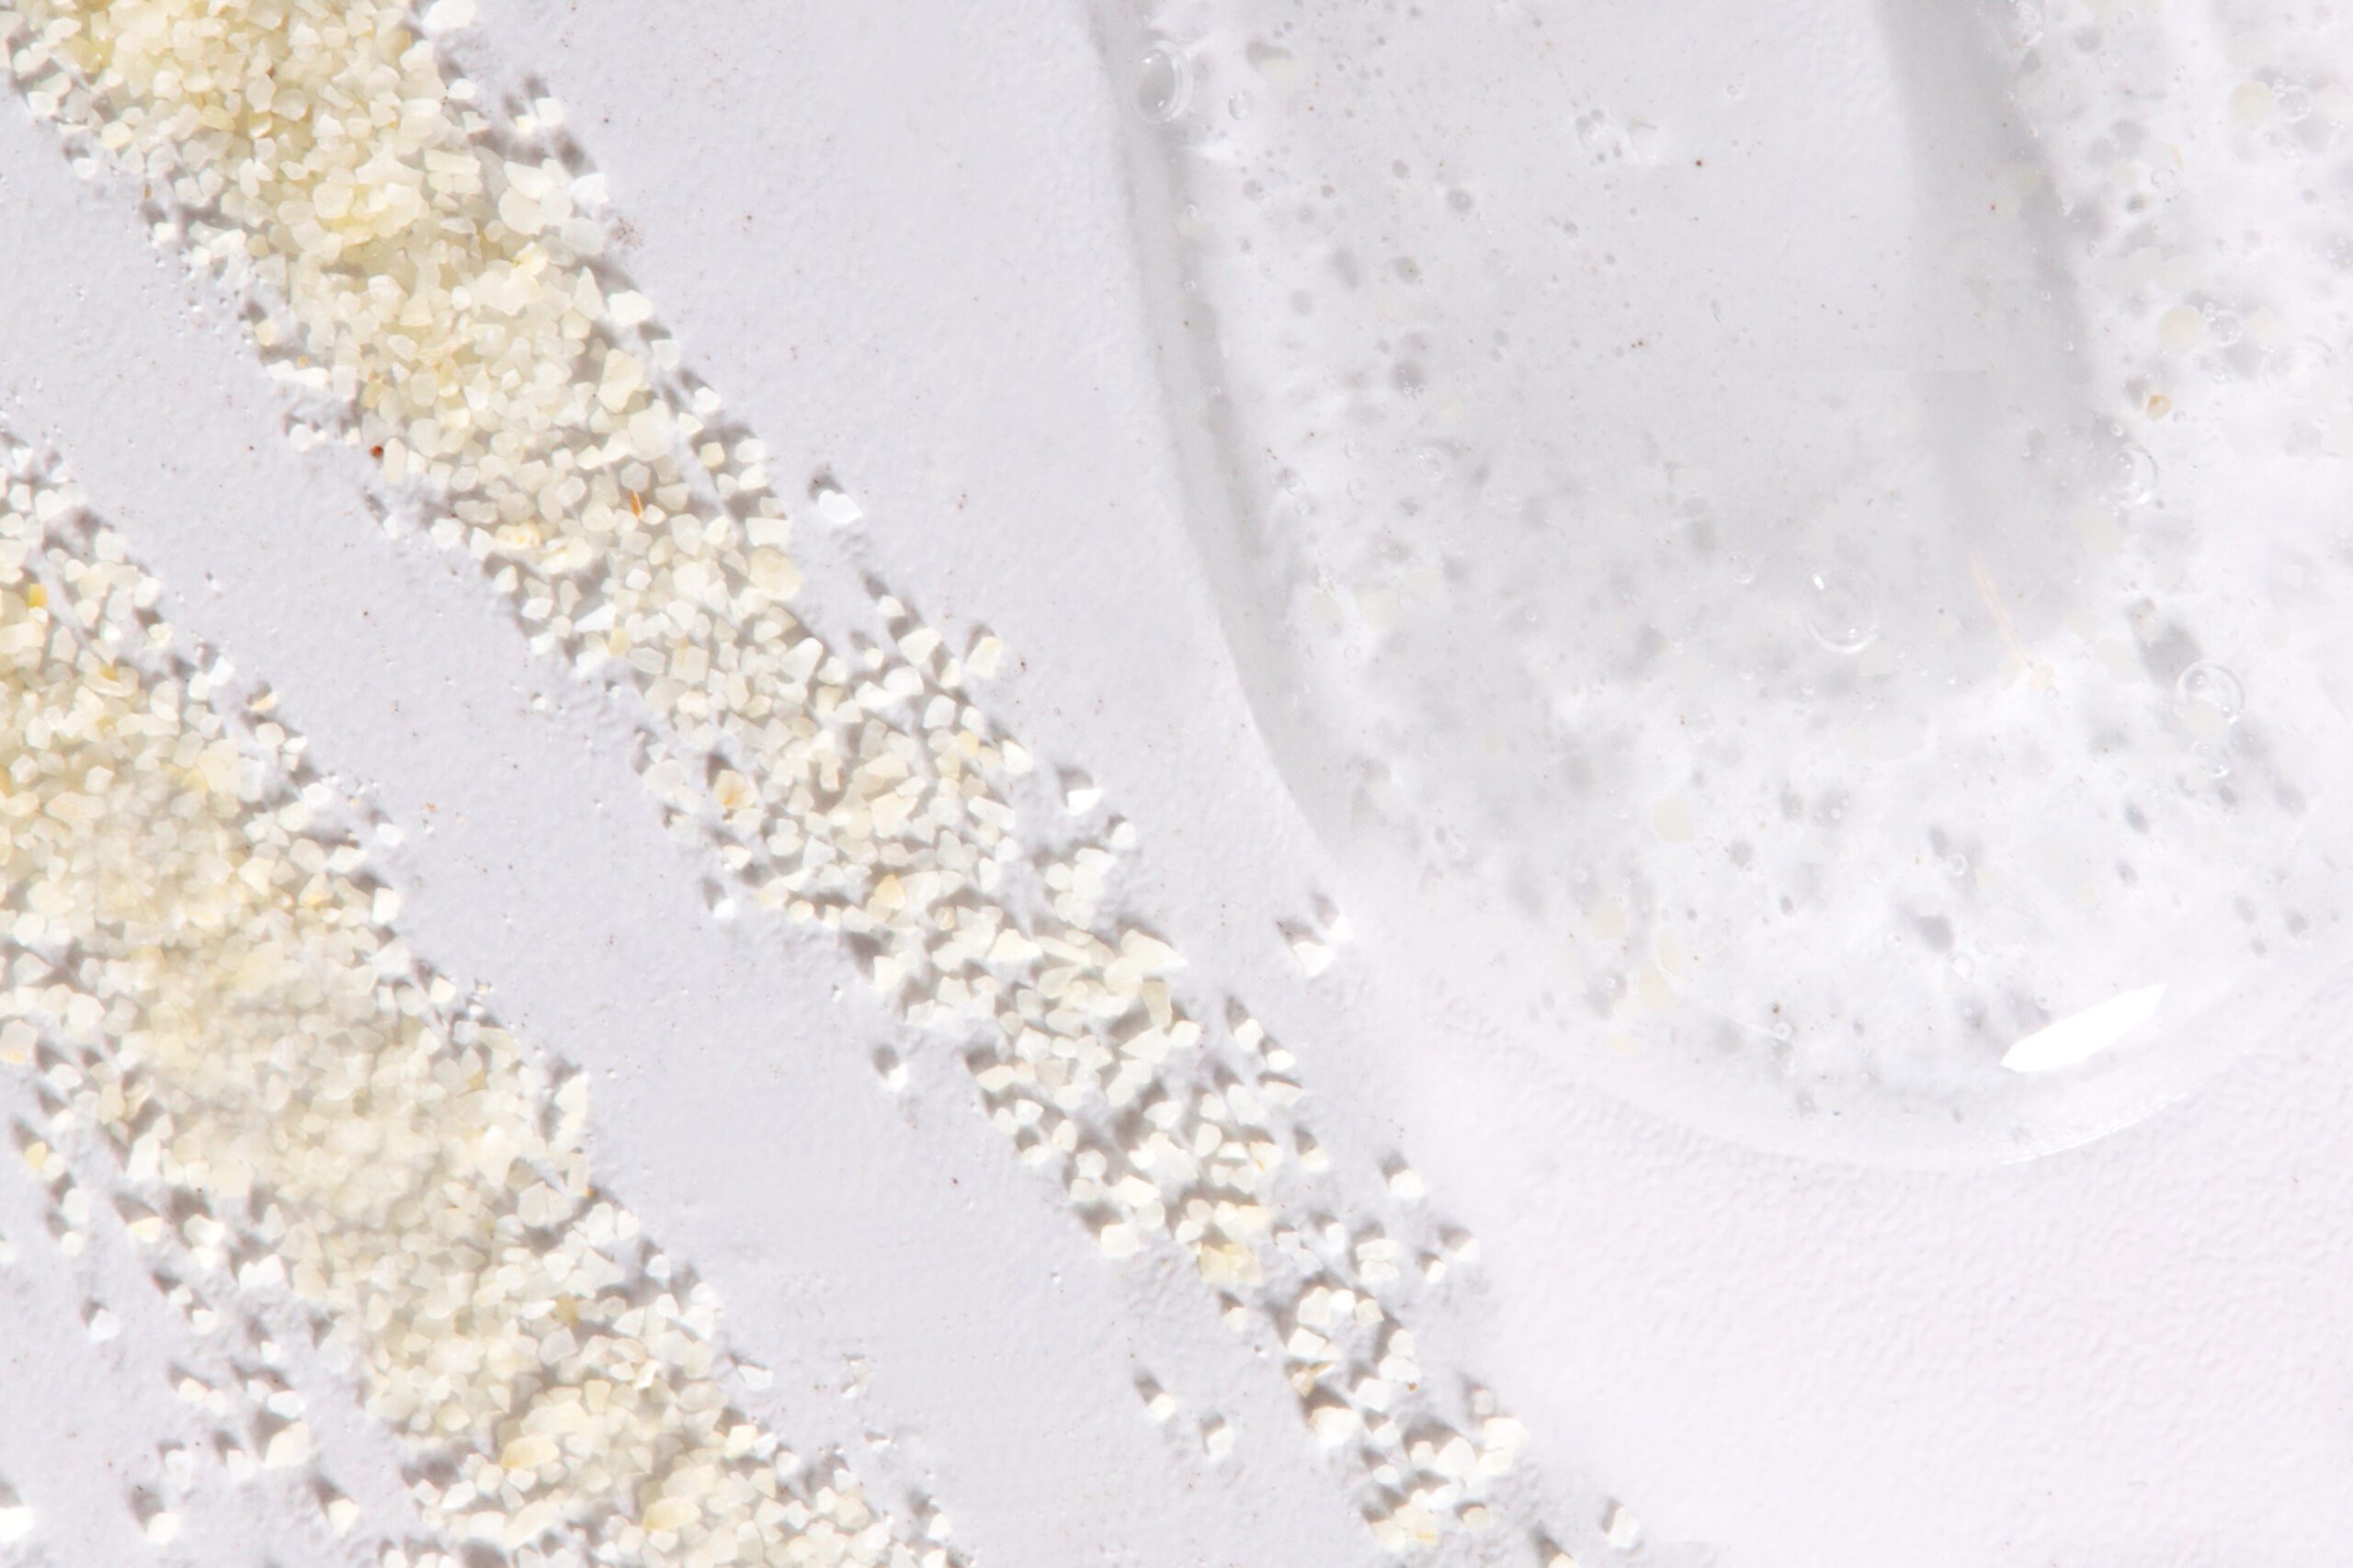 Lessonia is a manufacturer of exfoliants for developing cosmetic products and exfoliating treatments such as scrubs. 